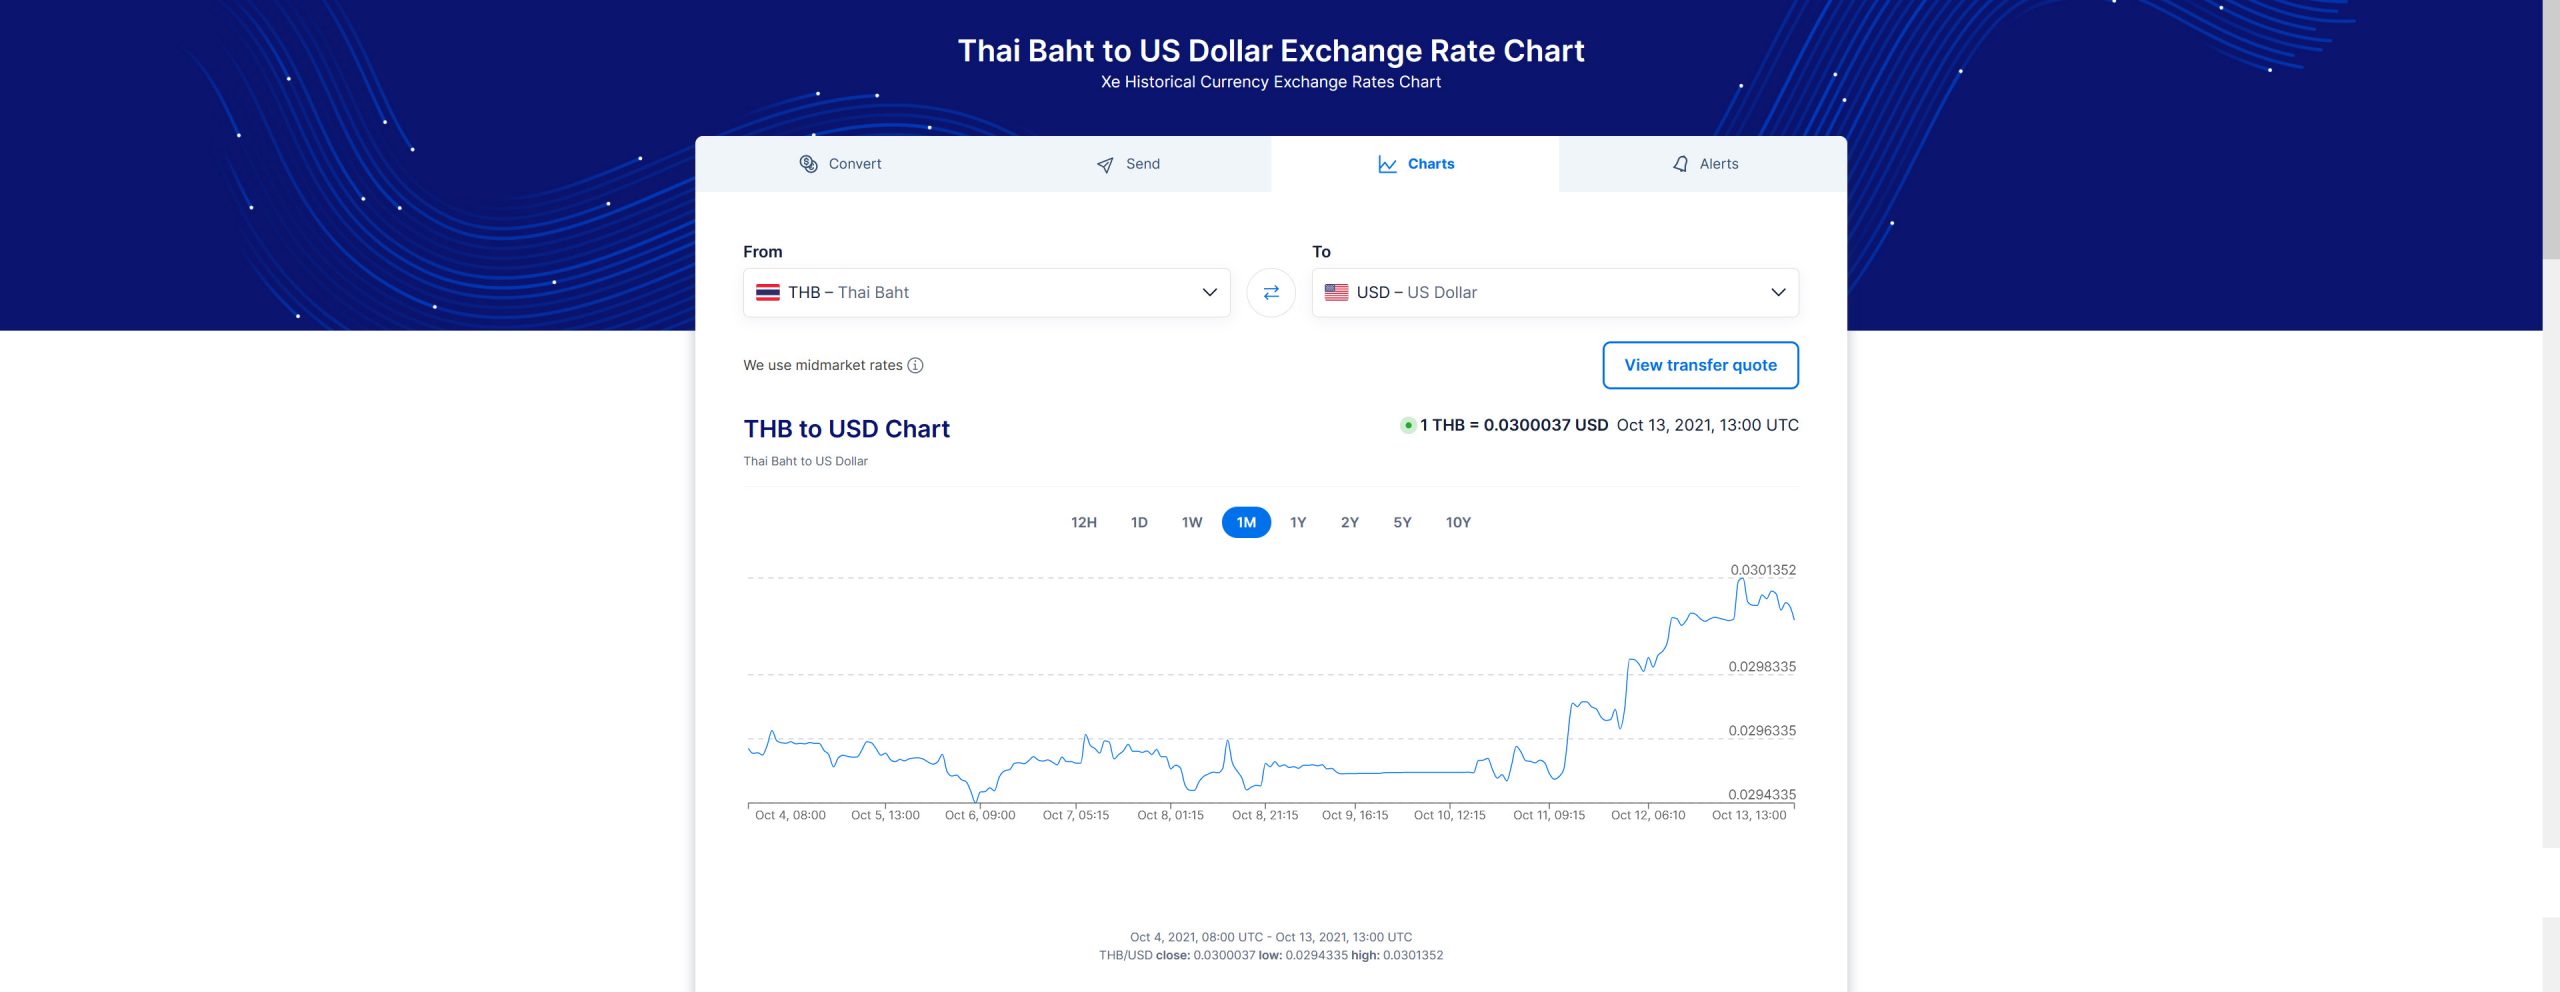 USD to Thai Baht Exchange Rate